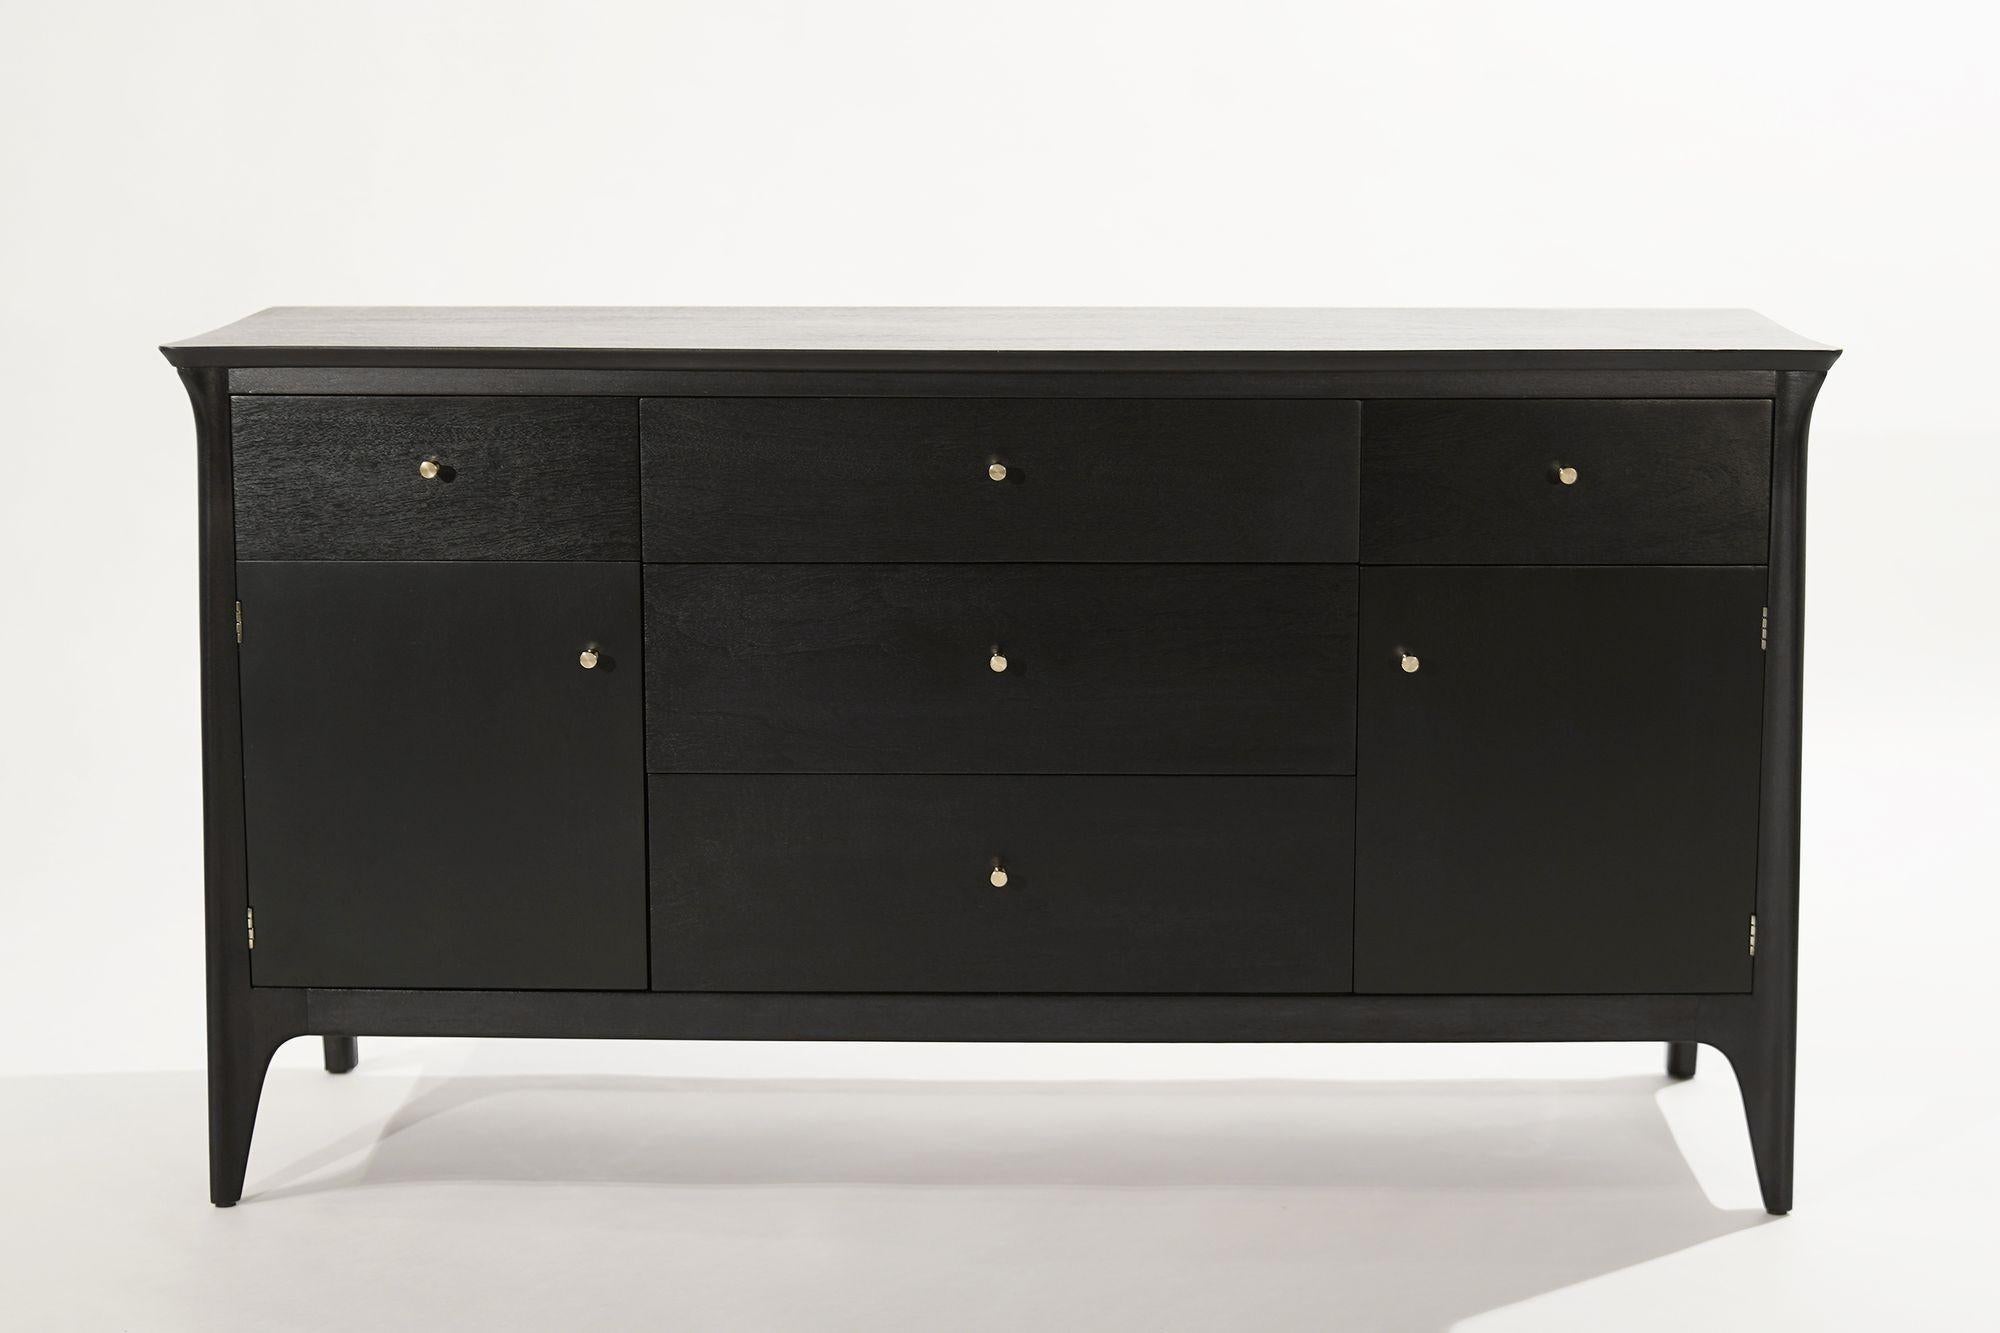 A beautifully restored credenza or buffet designed by Kipp Stewart for Drexel, USA, circa 1950-1959, executed in mahogany redone in our ebonized finish. Features five drawers and side doors containing shelving. 
 
Other designers from this period